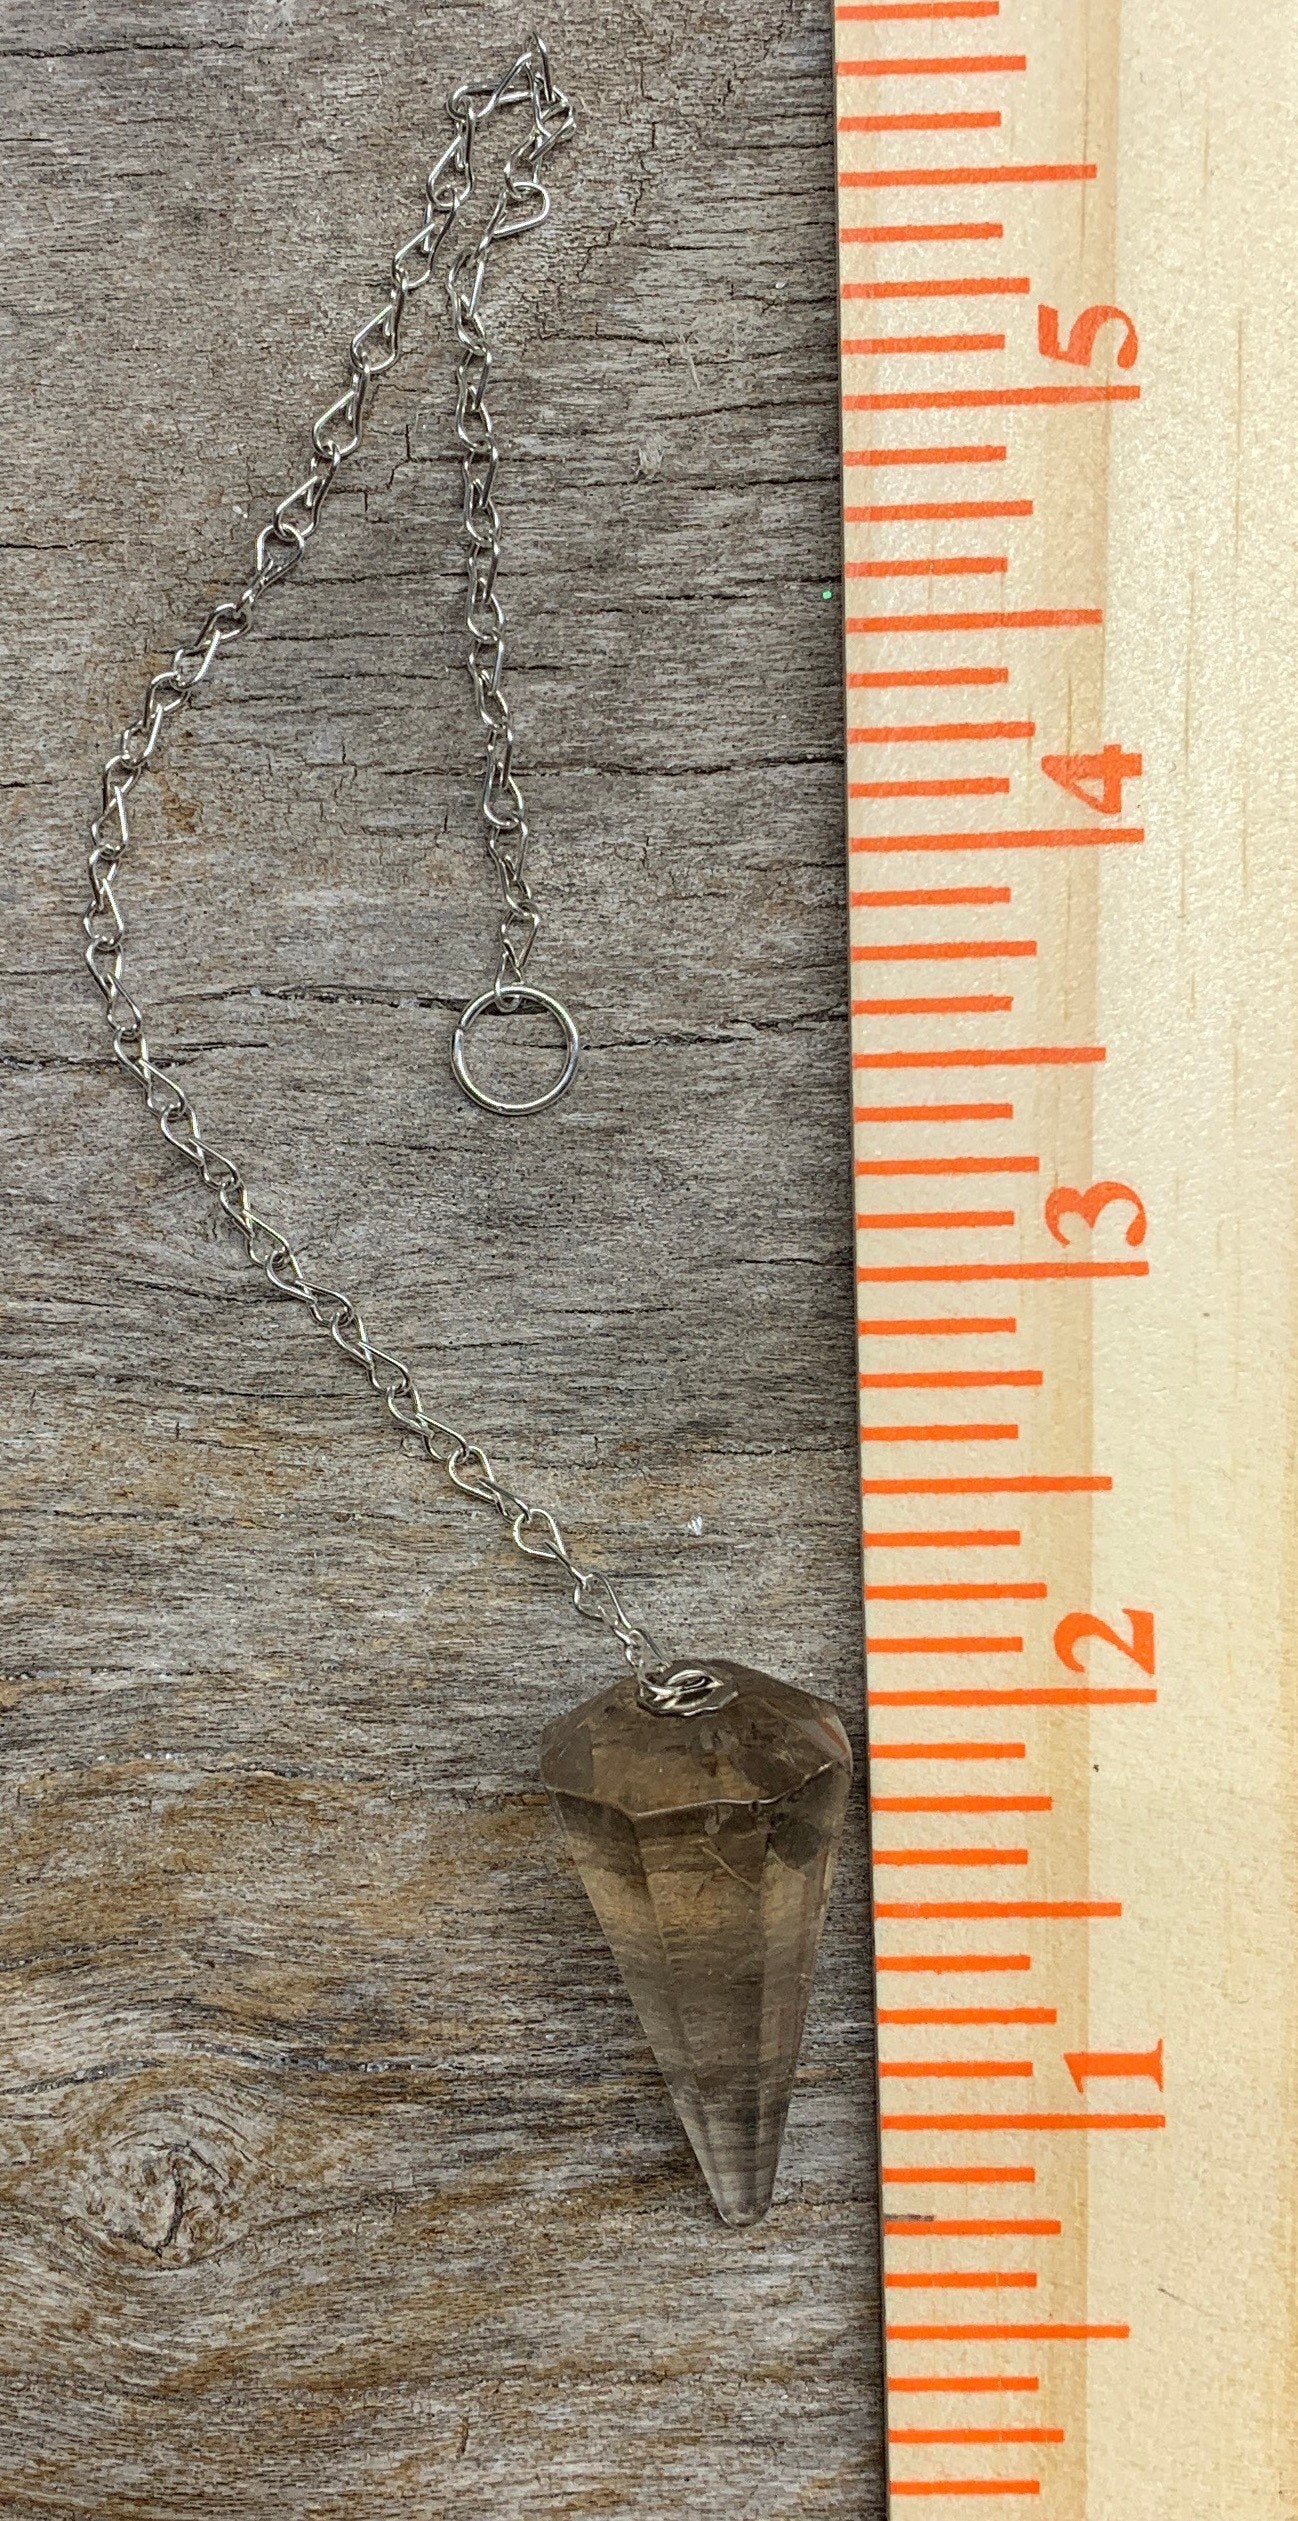 1 1/4 inch smoky quartz crystal point pendulum including a silver 8 inch chain displayed next to a ruler